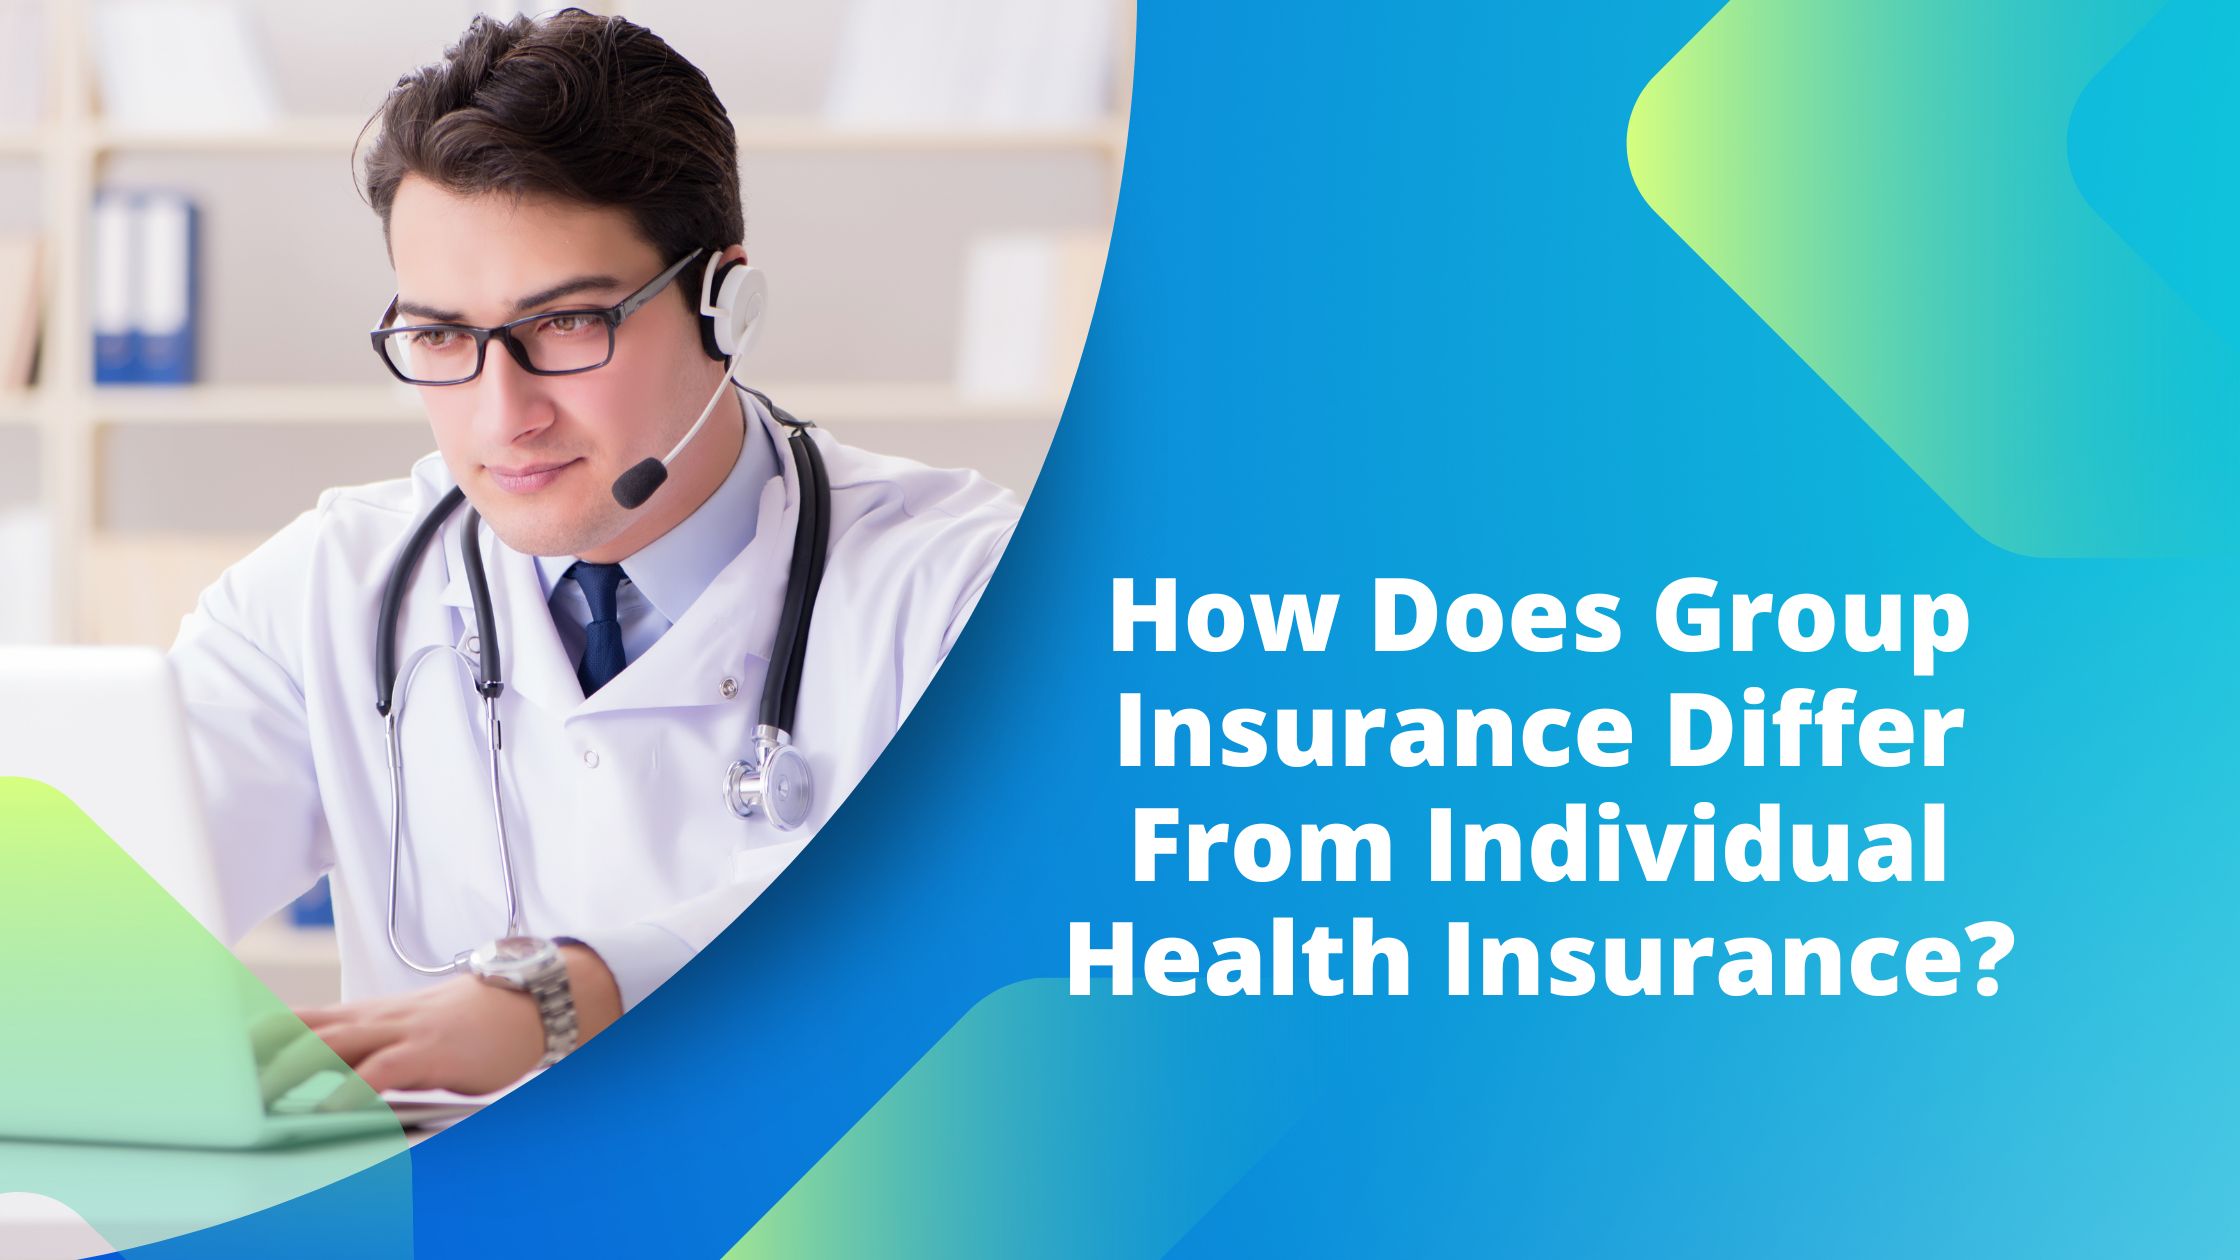 How Does Group Insurance Differ From Individual Health Insurance